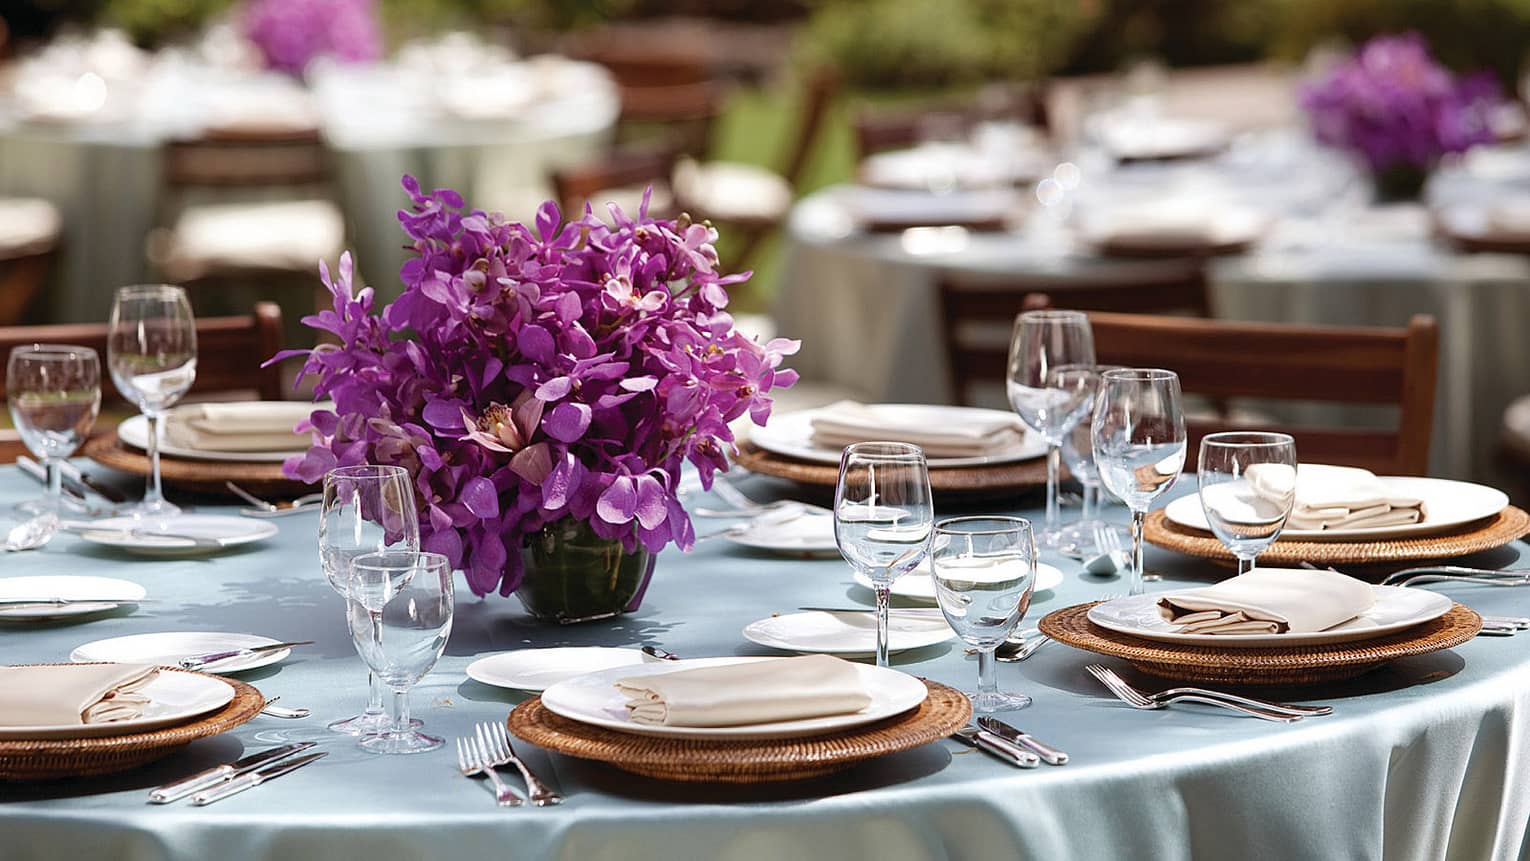 Close-up of round outdoor dining table with place settings, purple flower centrepiece 